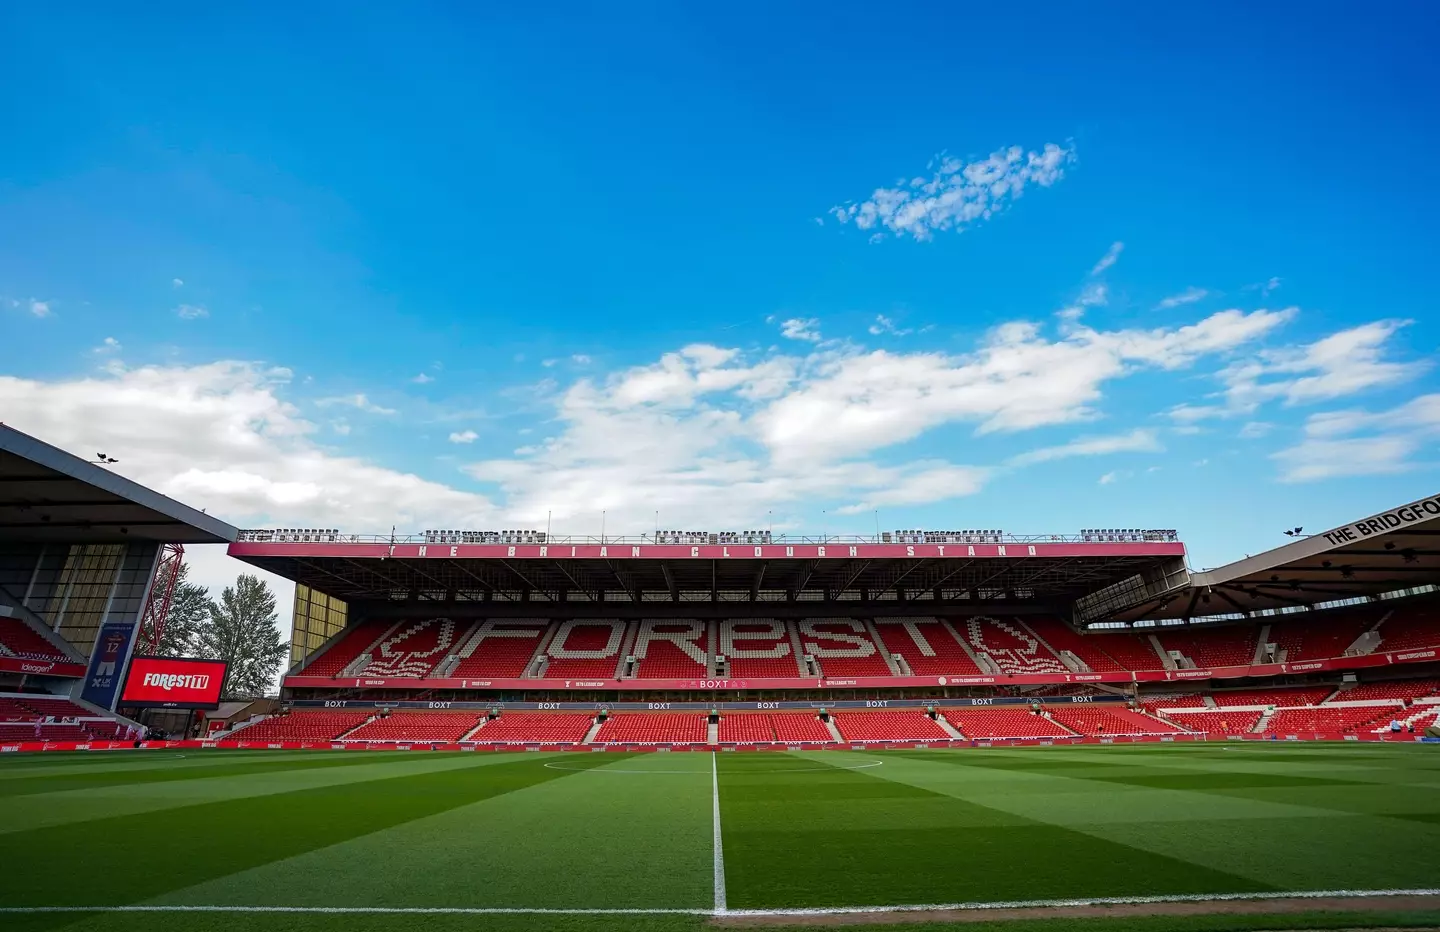 General view inside the ground ahead of the City Ground - Nottingham Forest. (Alamy)